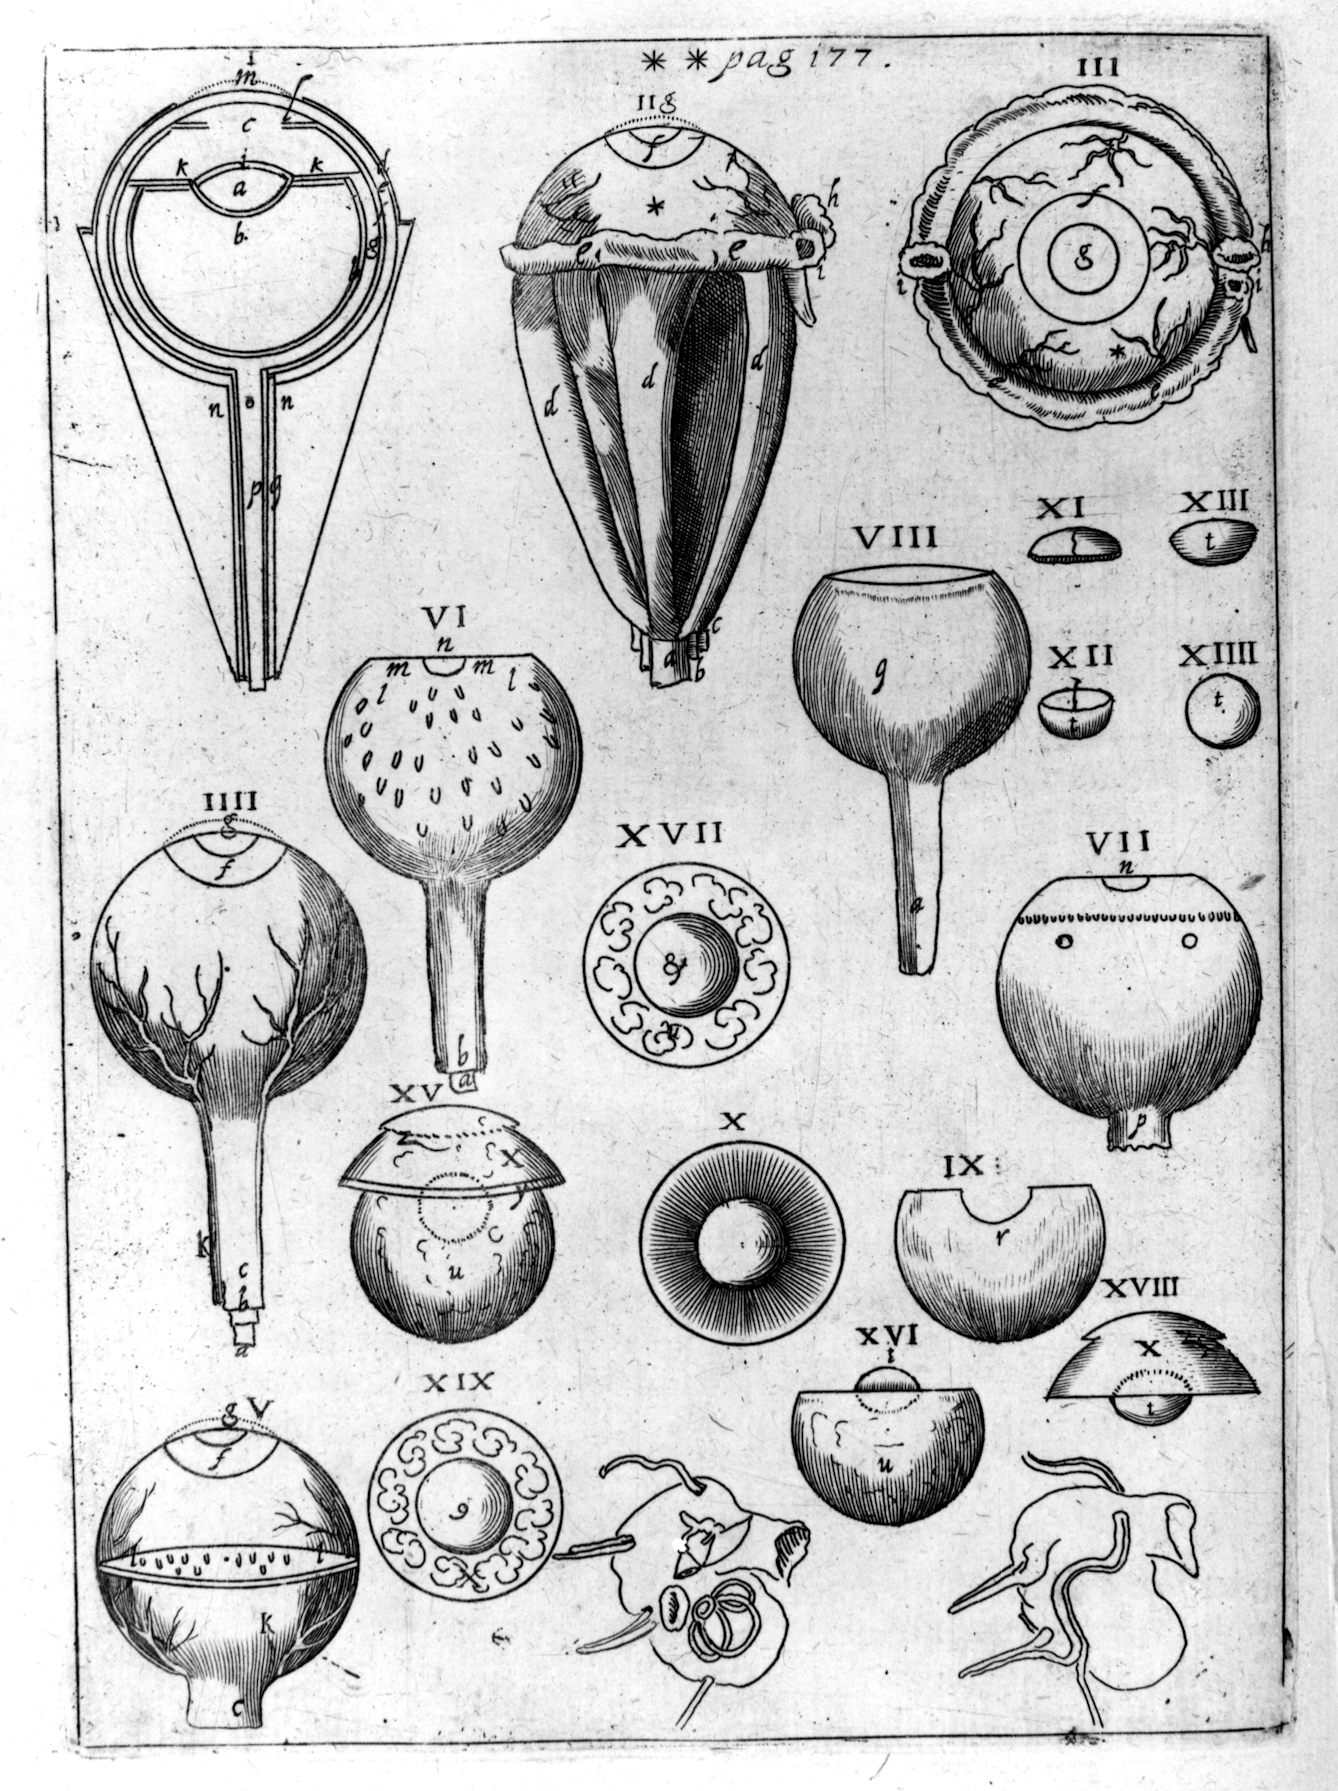 Plate from Johannes Kepler's Ad Vitellionem Paralipomena, quibus Astronomiae Pars Optica (1604), illustrating the structure of eyes.